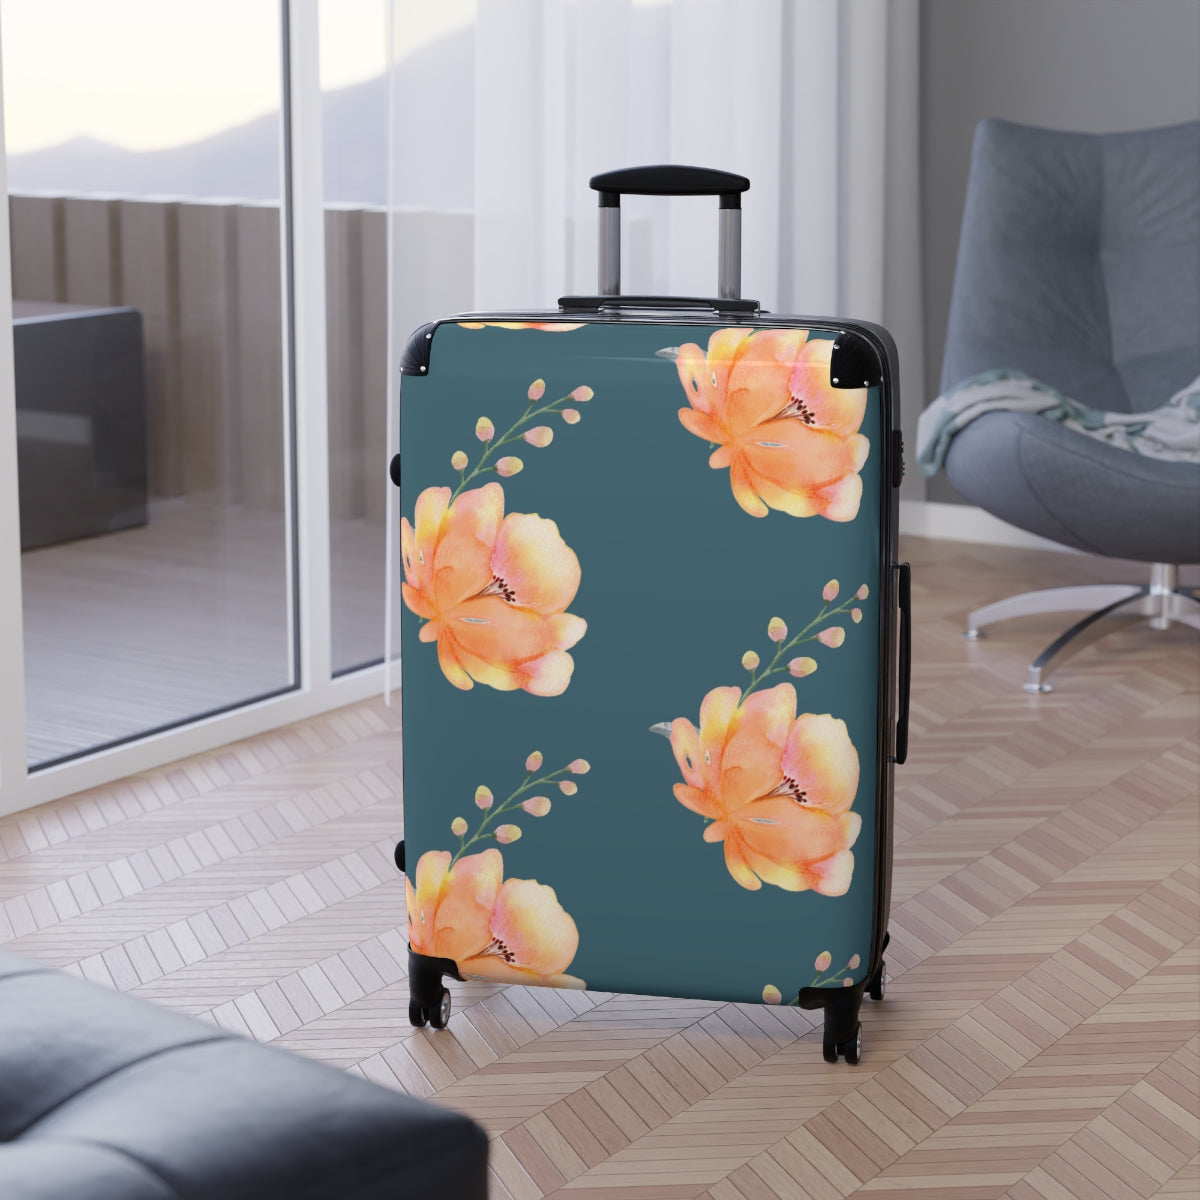 LUGGAGE FOR WOMEN, Floral Suitcases by Artzira, Cabin Suitcase, Carry-on Luggage, Trolly Travel Bags 4 Wheeled Spinners, Gift for her